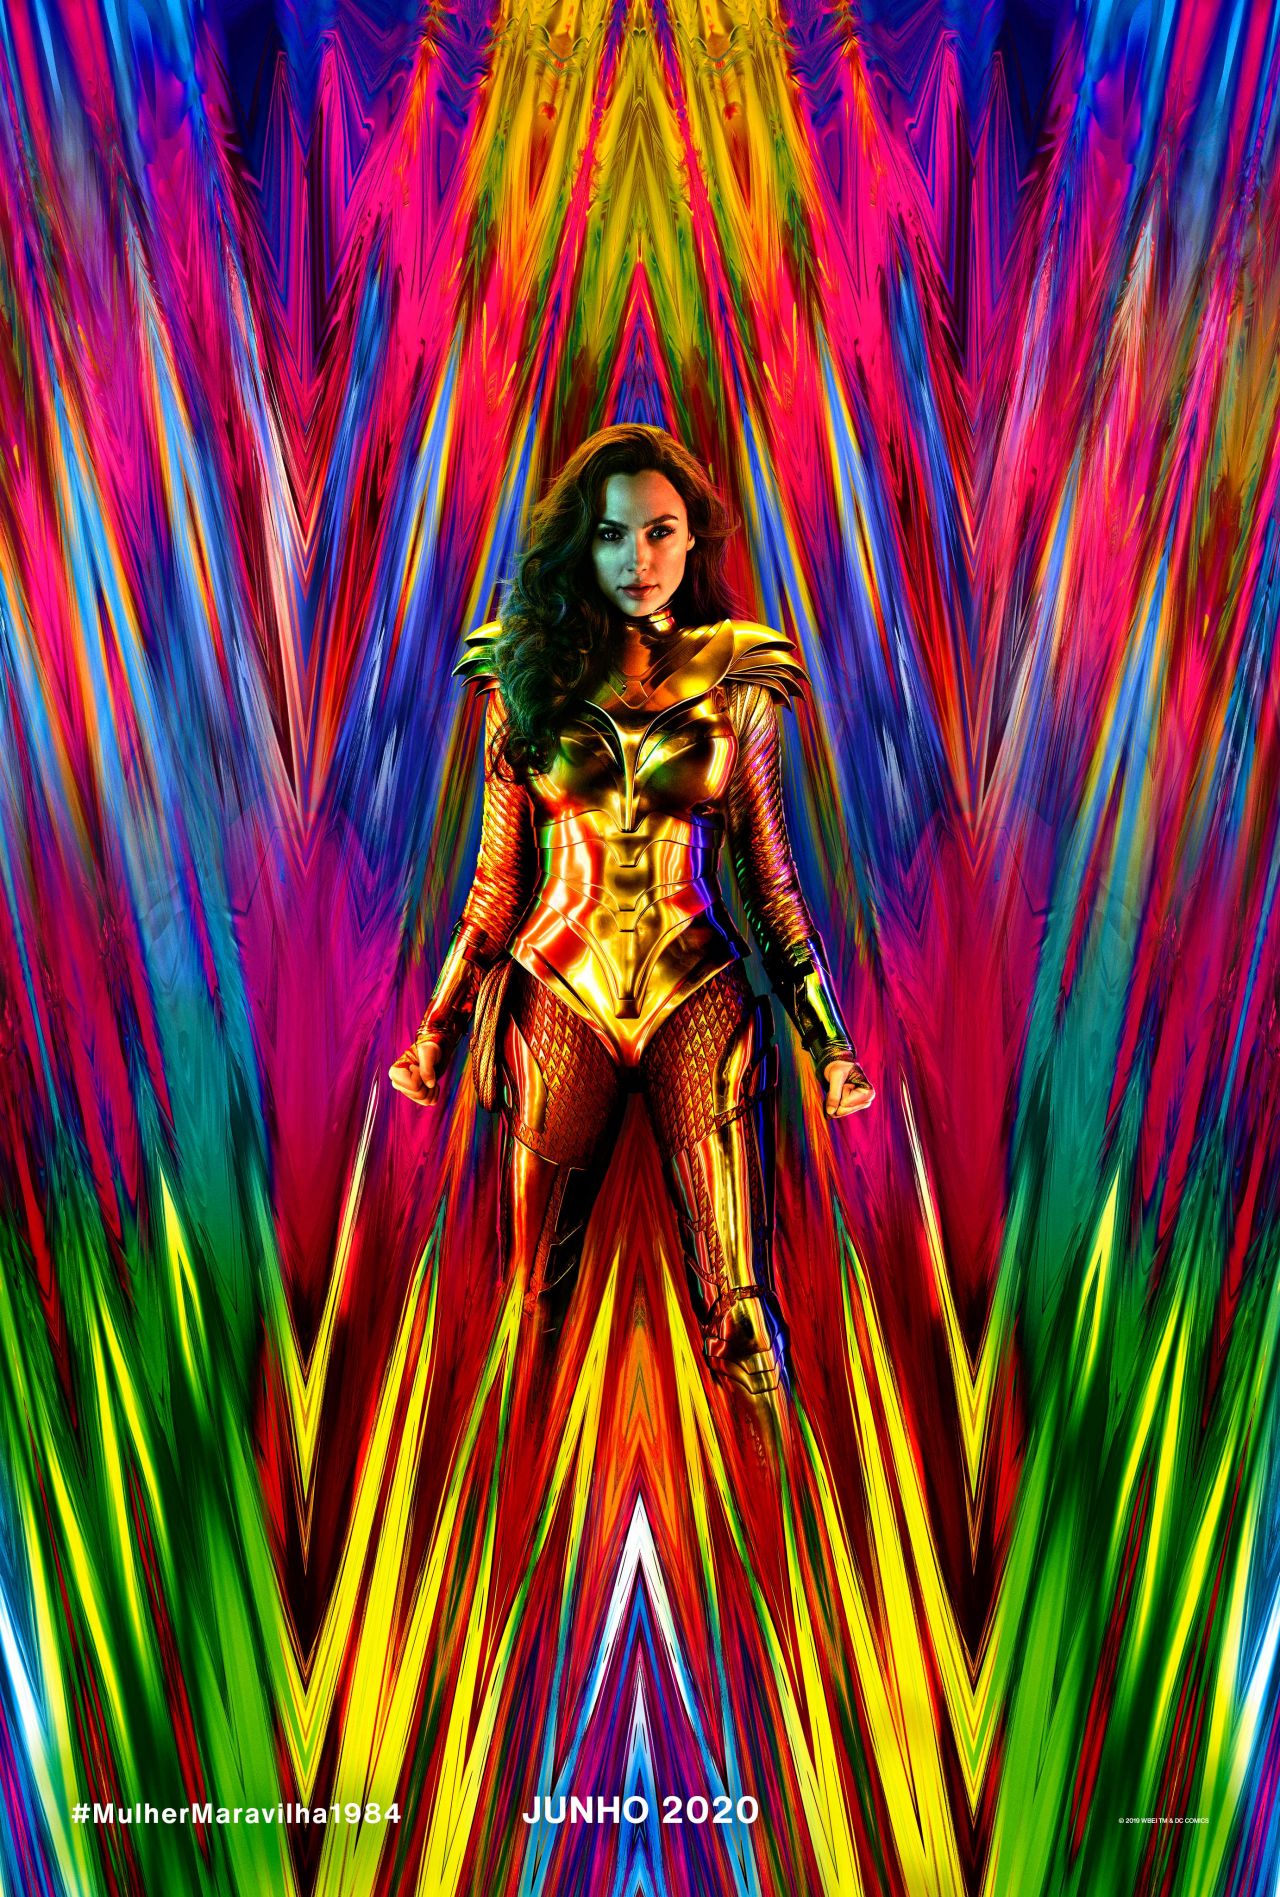 People 1280x1897 women actress brunette long hair Wonder Woman movie poster colorful armor gold Israeli model standing figure-hugging armor frontal view